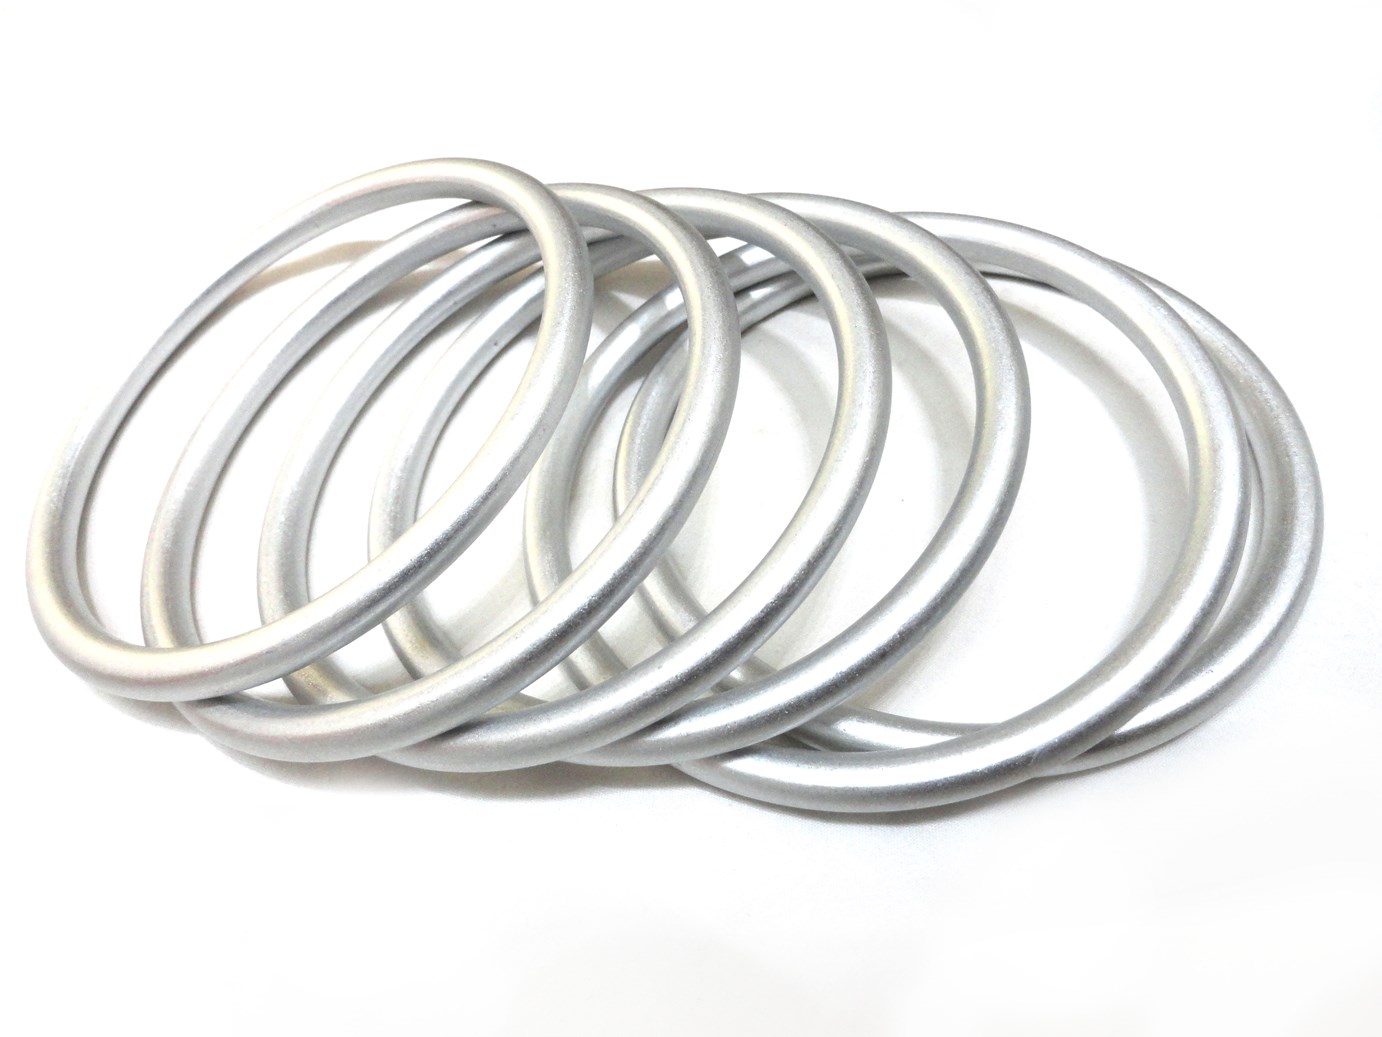 UNISOAR Aluminium Baby Sling Rings for Baby Carriers & Slings 3 Large Size Silver Color 1 Pair with Gift 